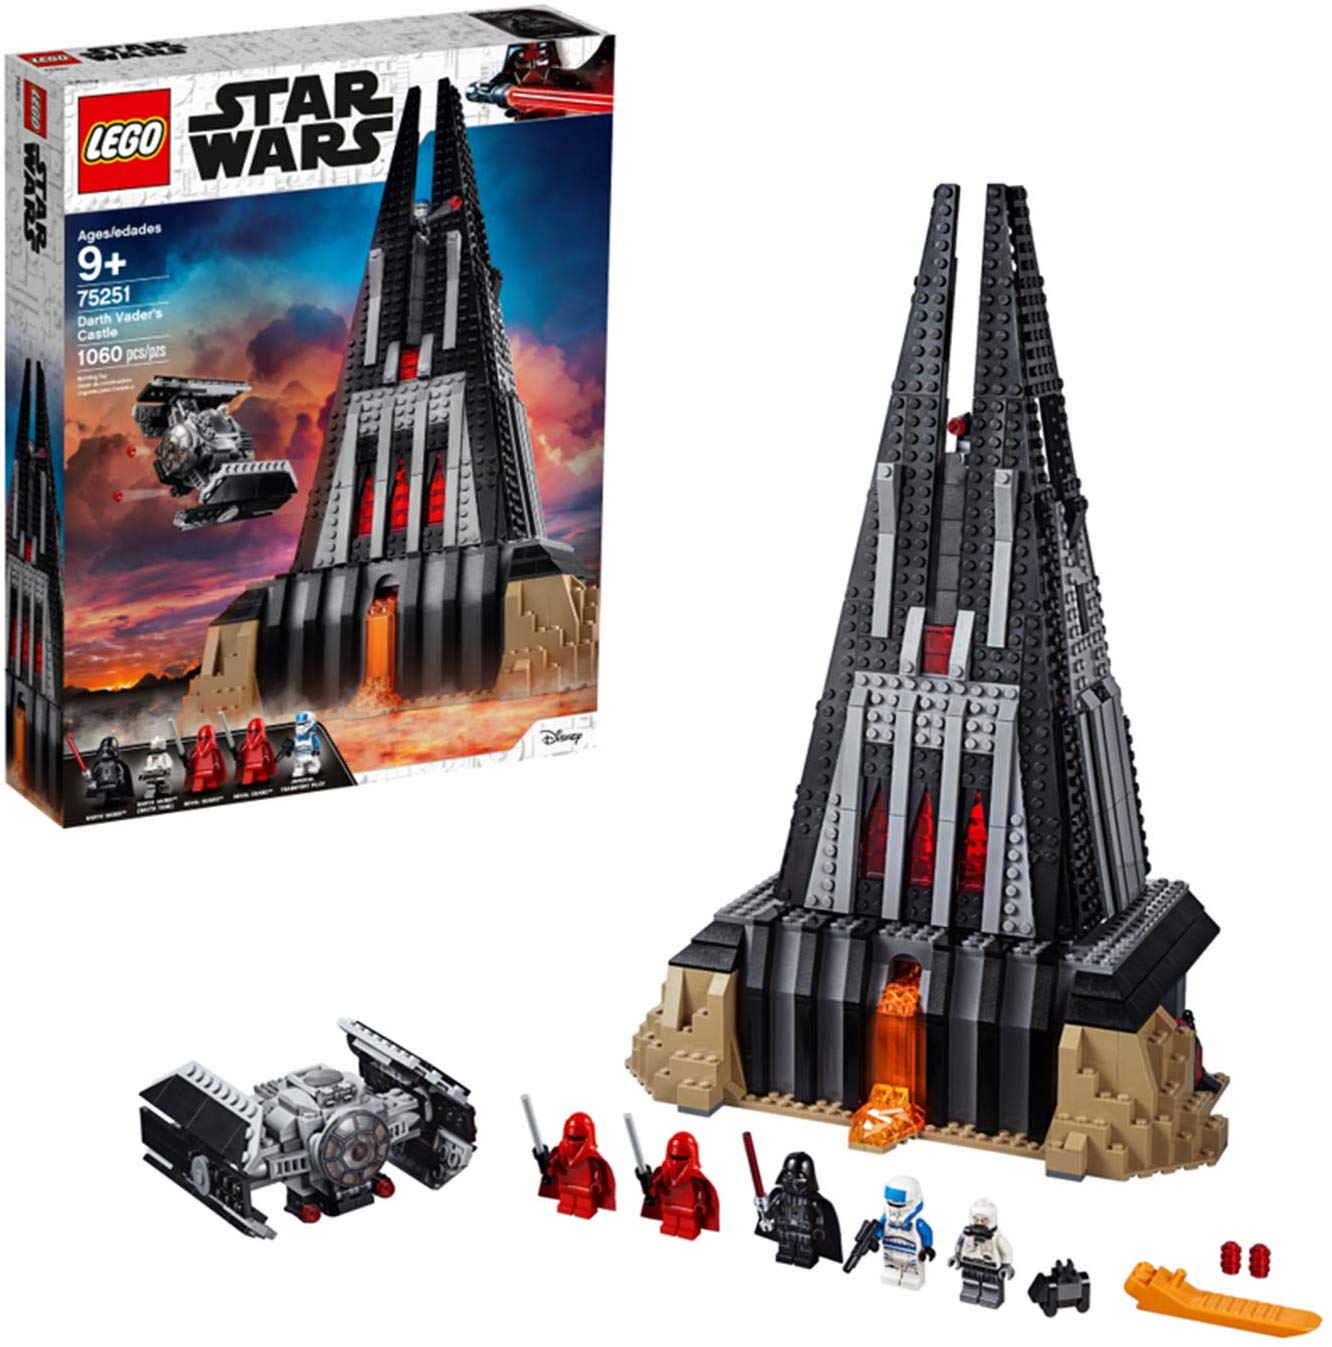 Lego 75251 Star Wars Darth Vader Castle Playset, Tie Fighter Toy And 5 Mini